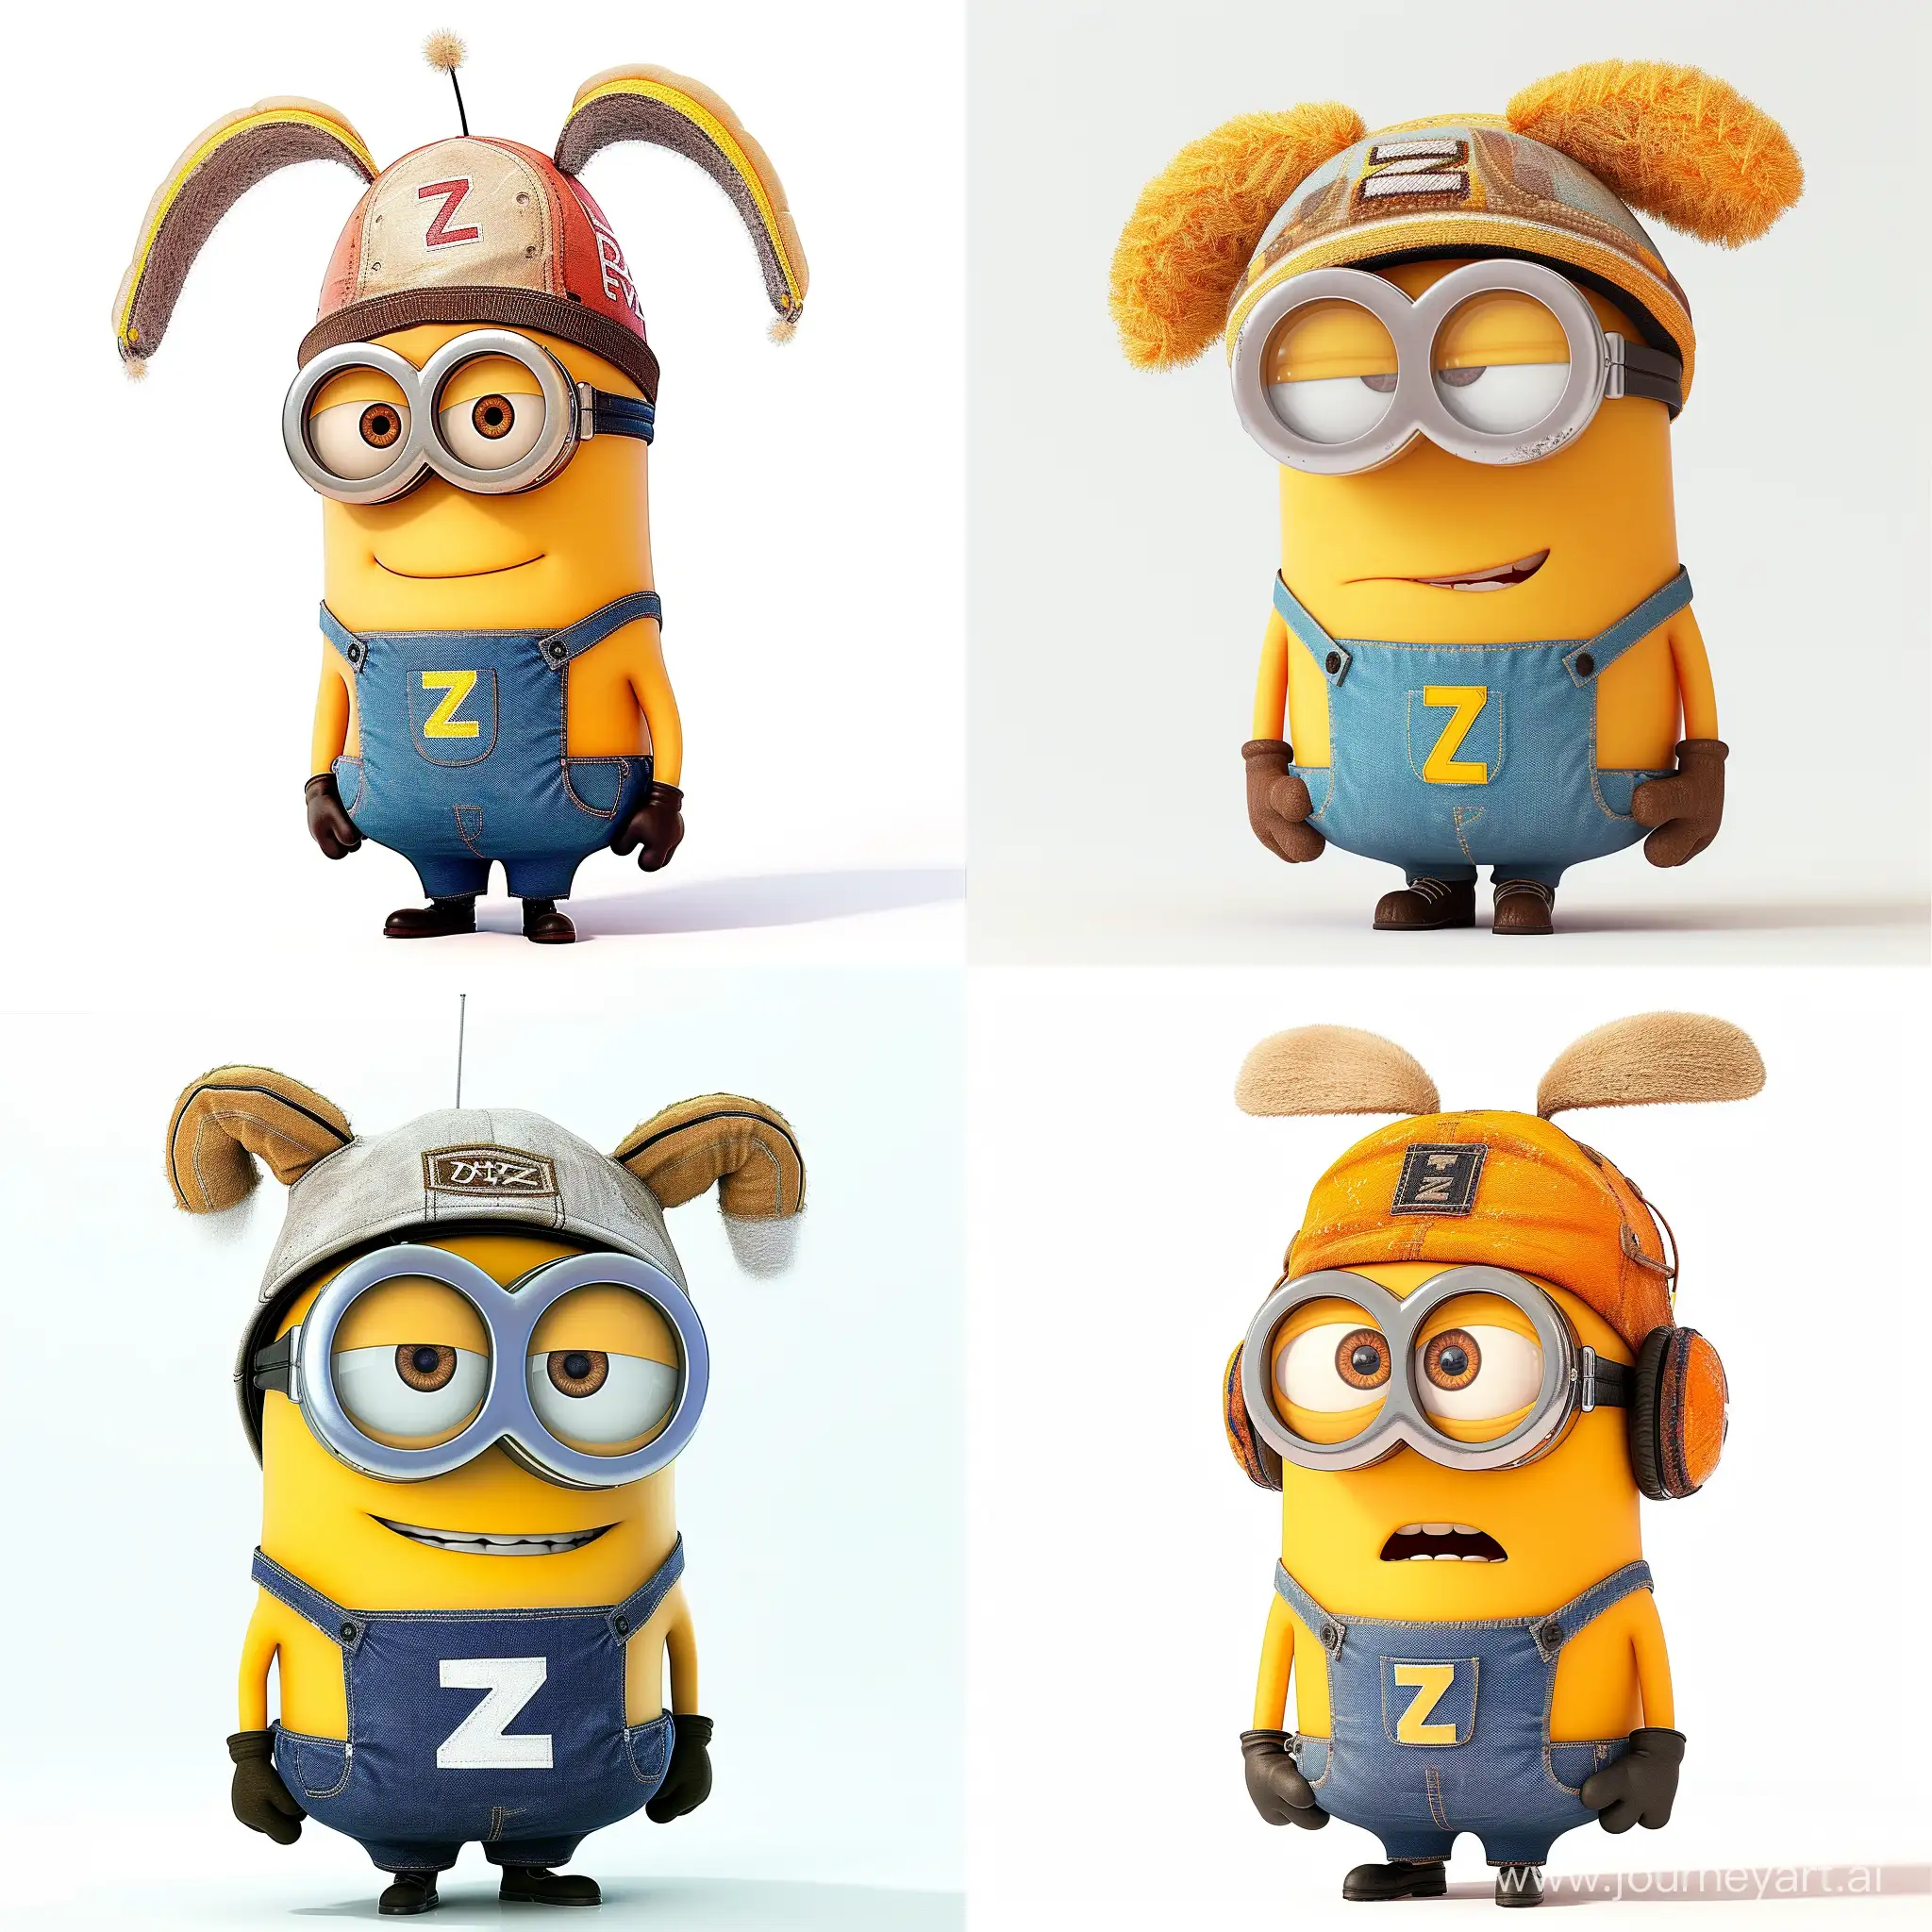 Adorable-Minion-Character-in-ZShirt-and-Earflap-Hat-on-White-Background